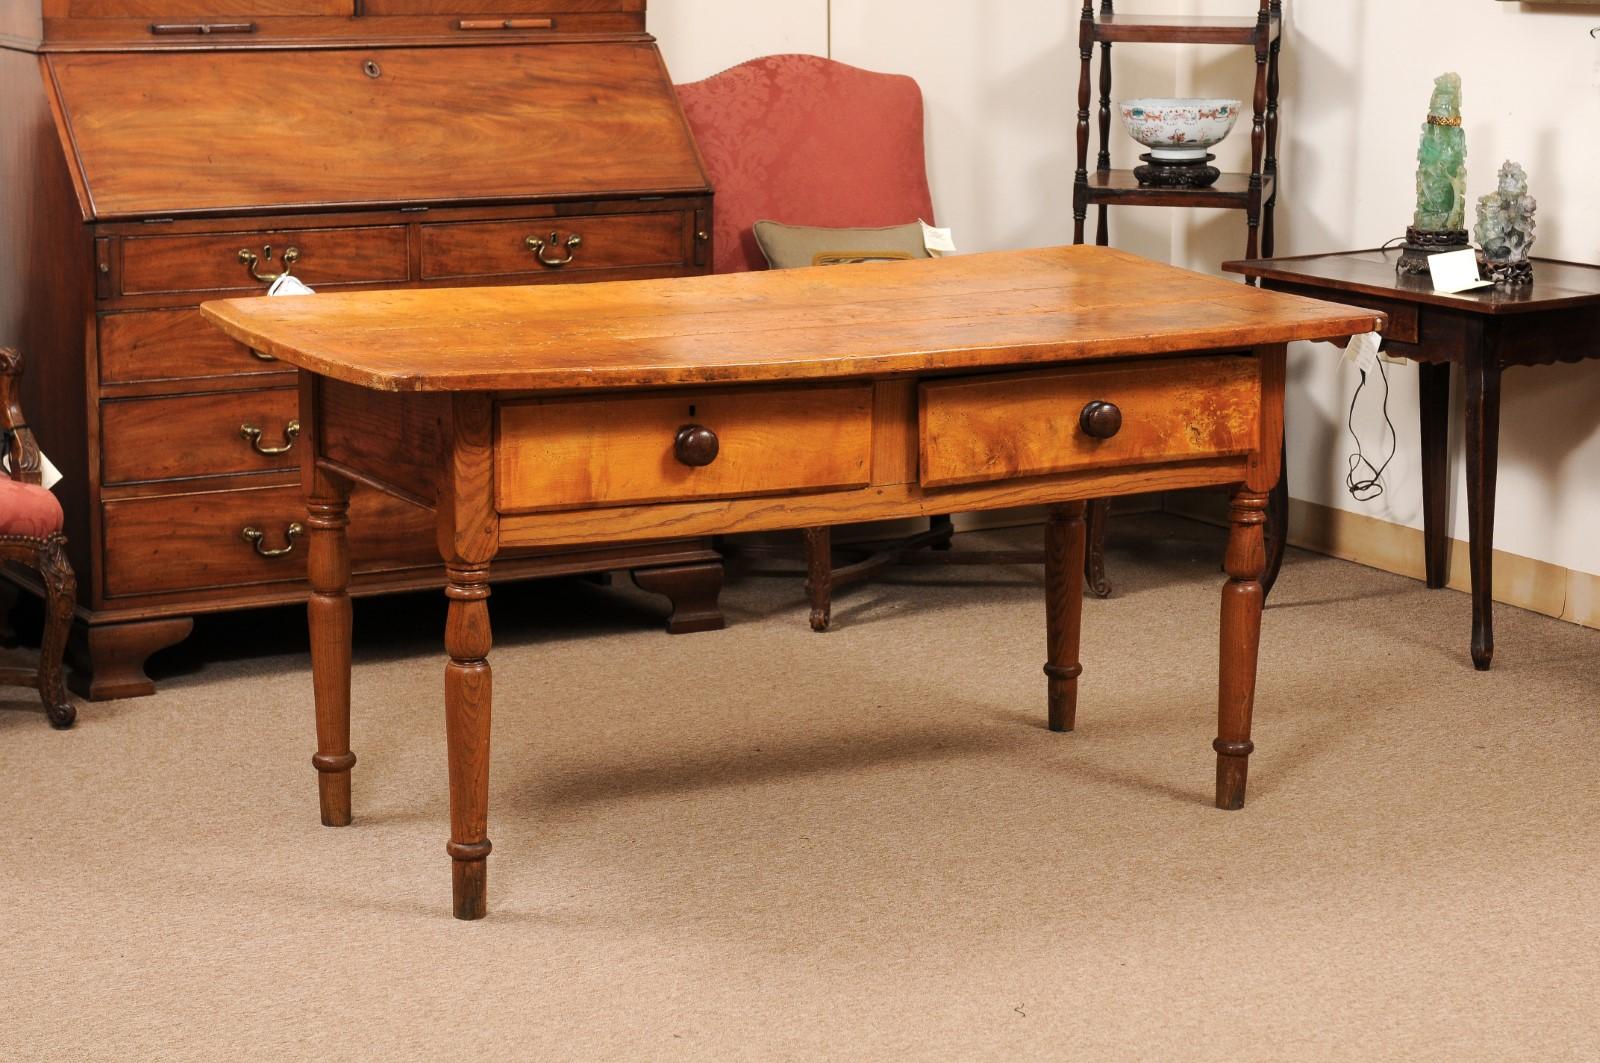 Large American Pine Kitchen Table with 2 Deep Drawers and Turned Legs, circa 1890.